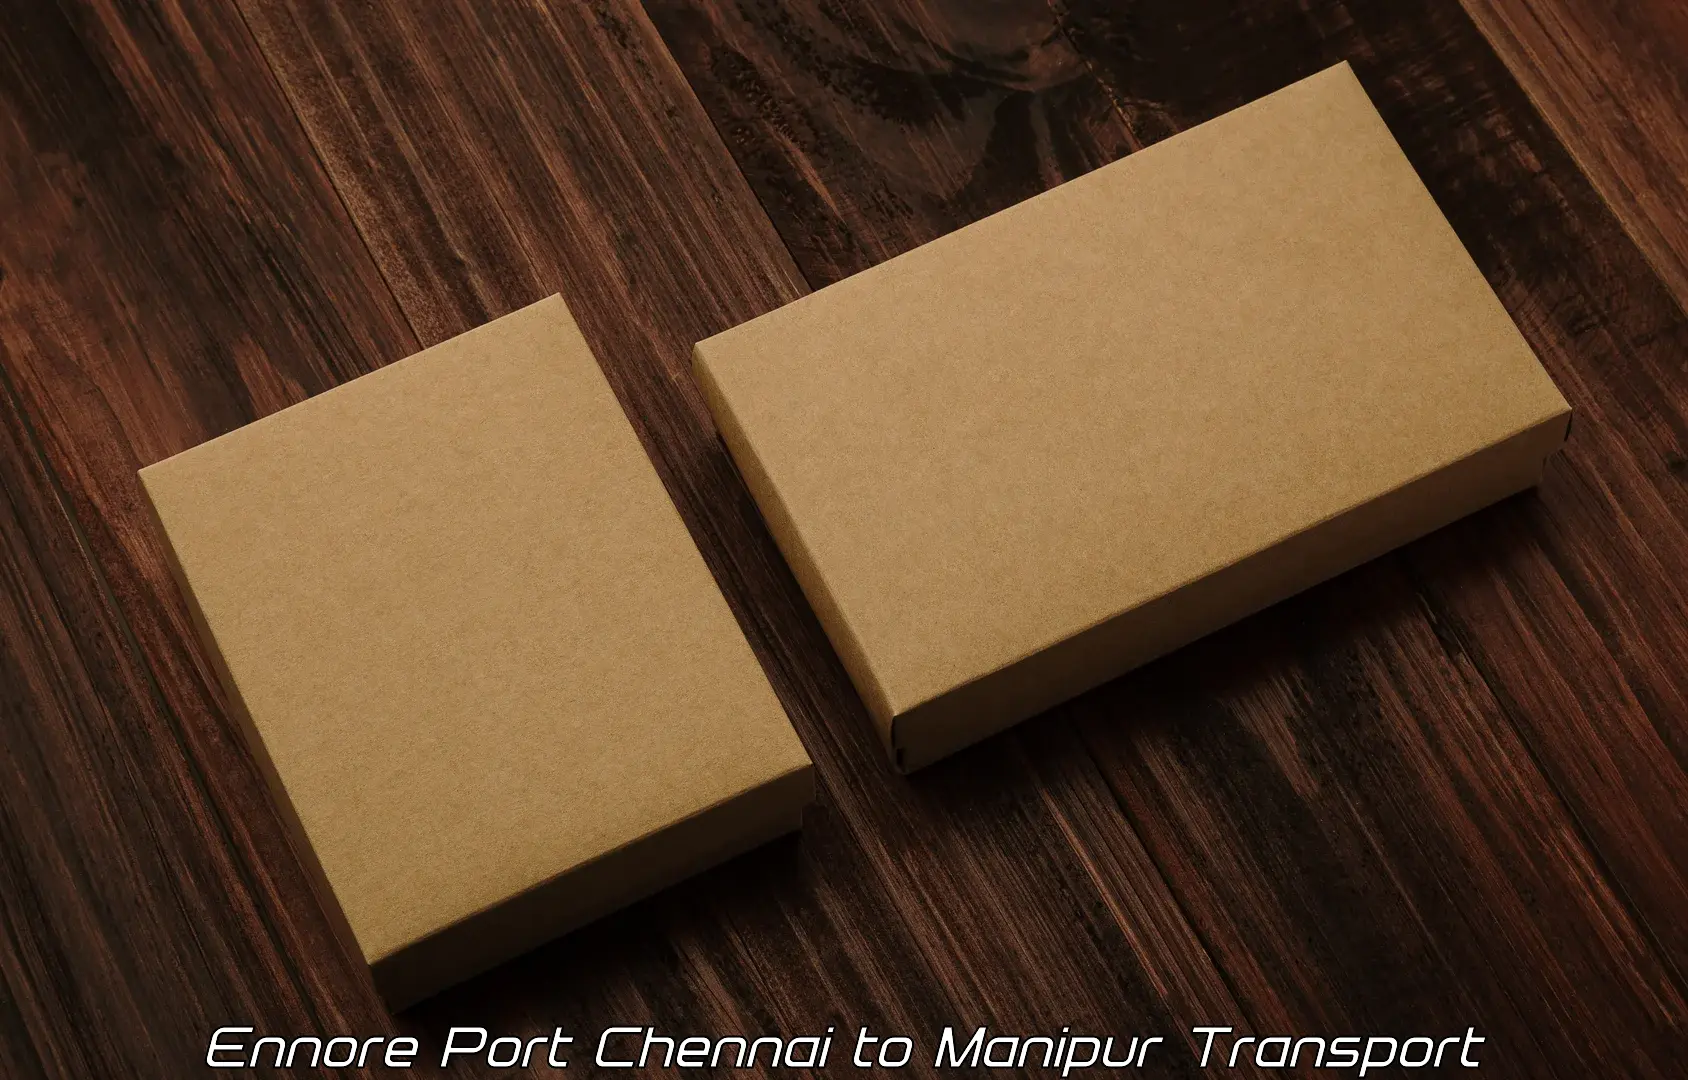 Delivery service in Ennore Port Chennai to Chandel